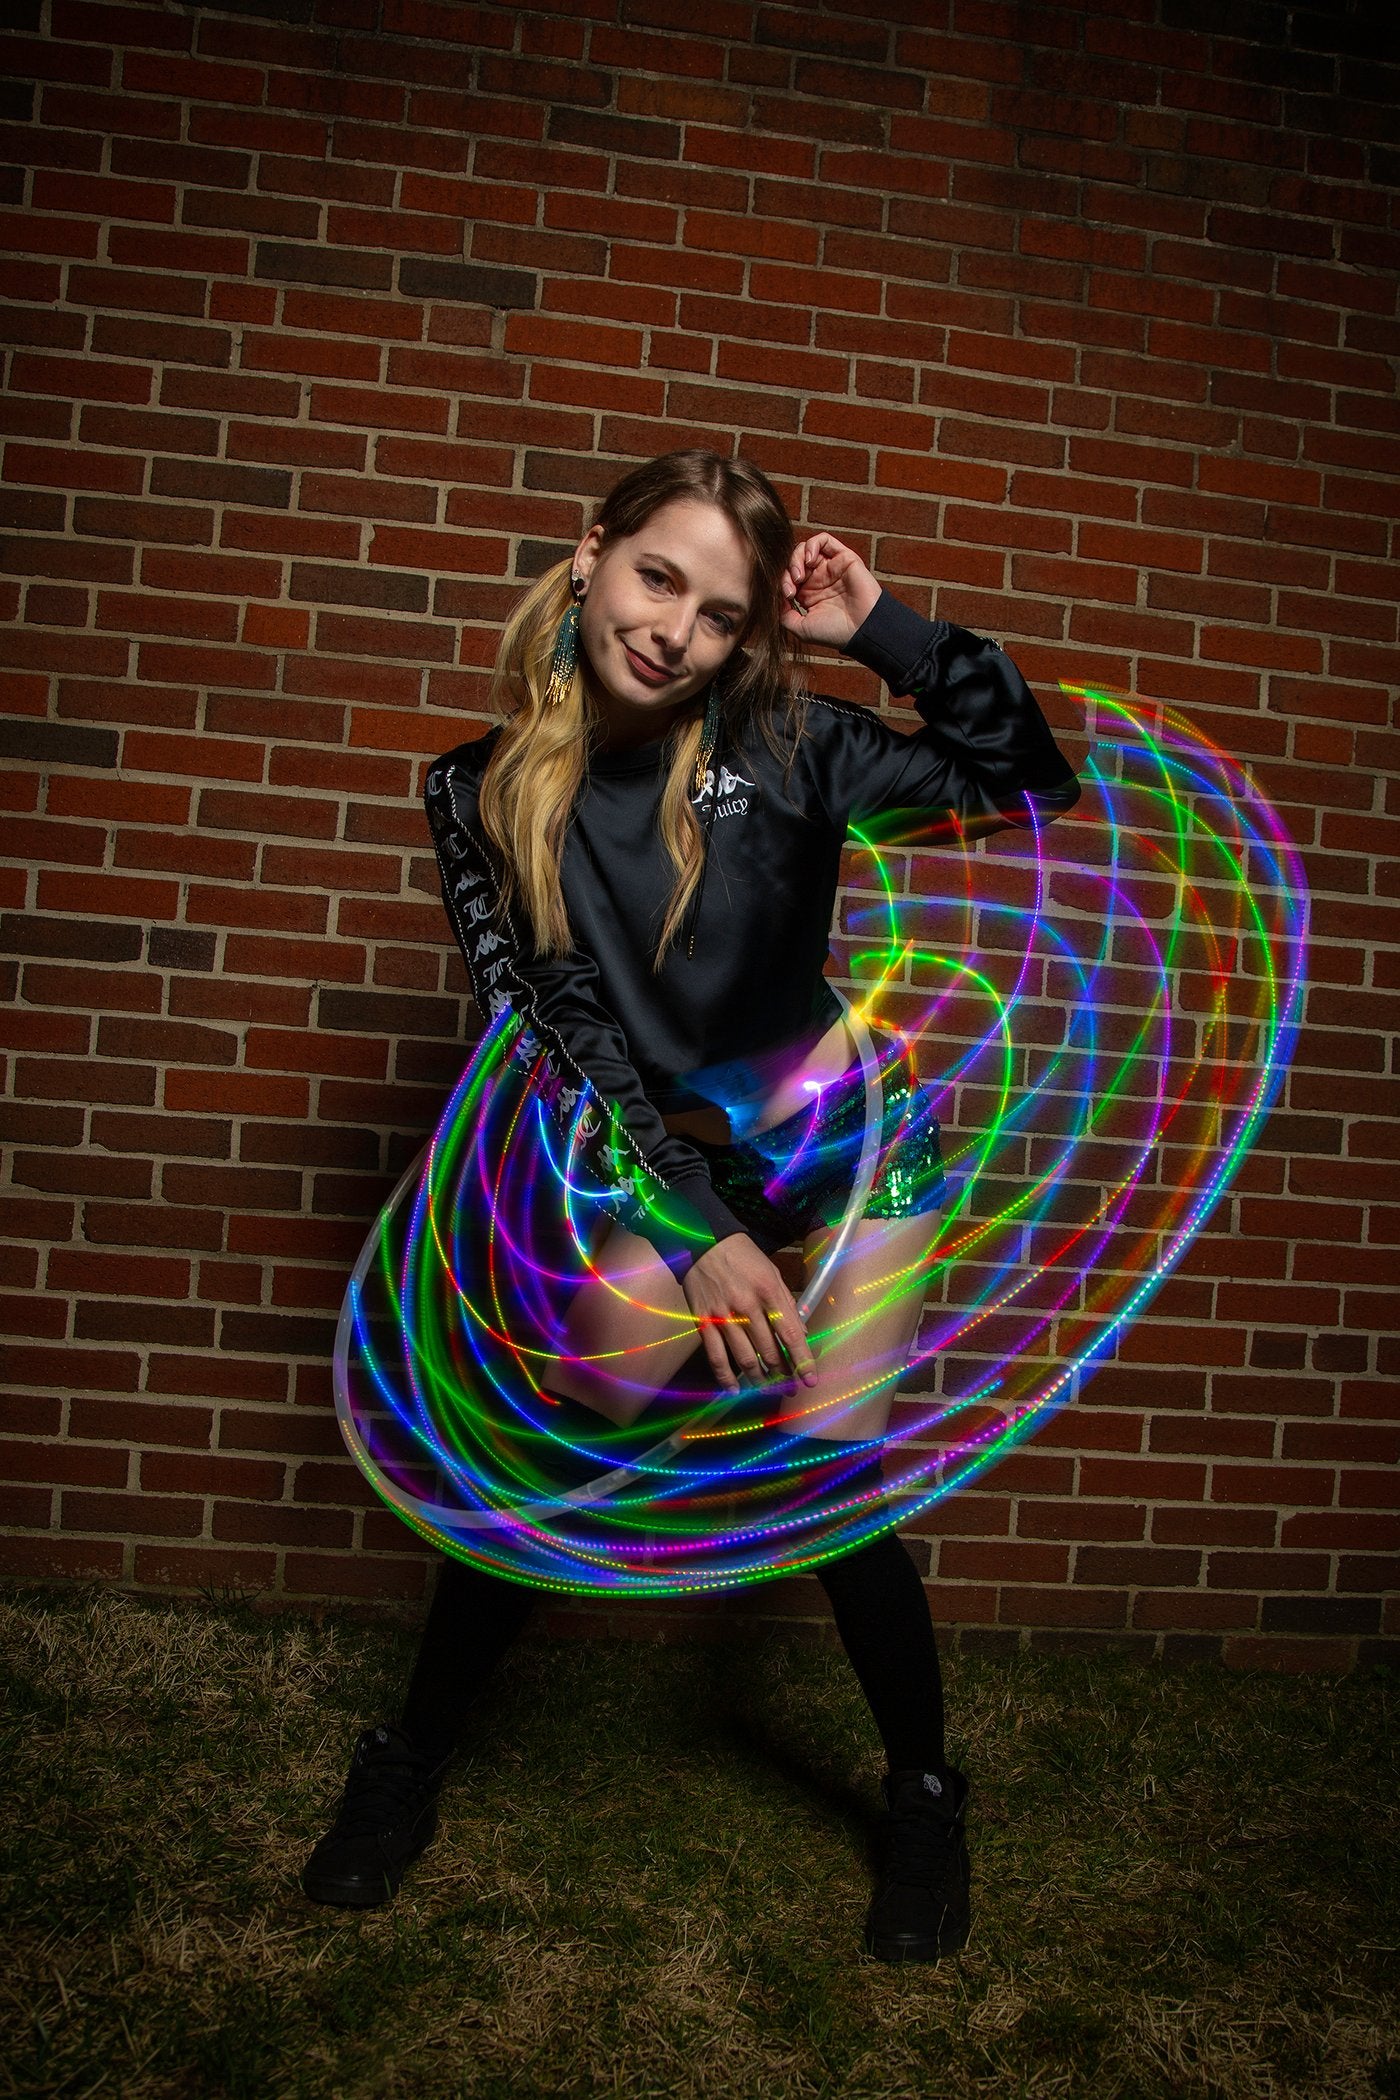 Starlight LED Hoop by Astral Hoops